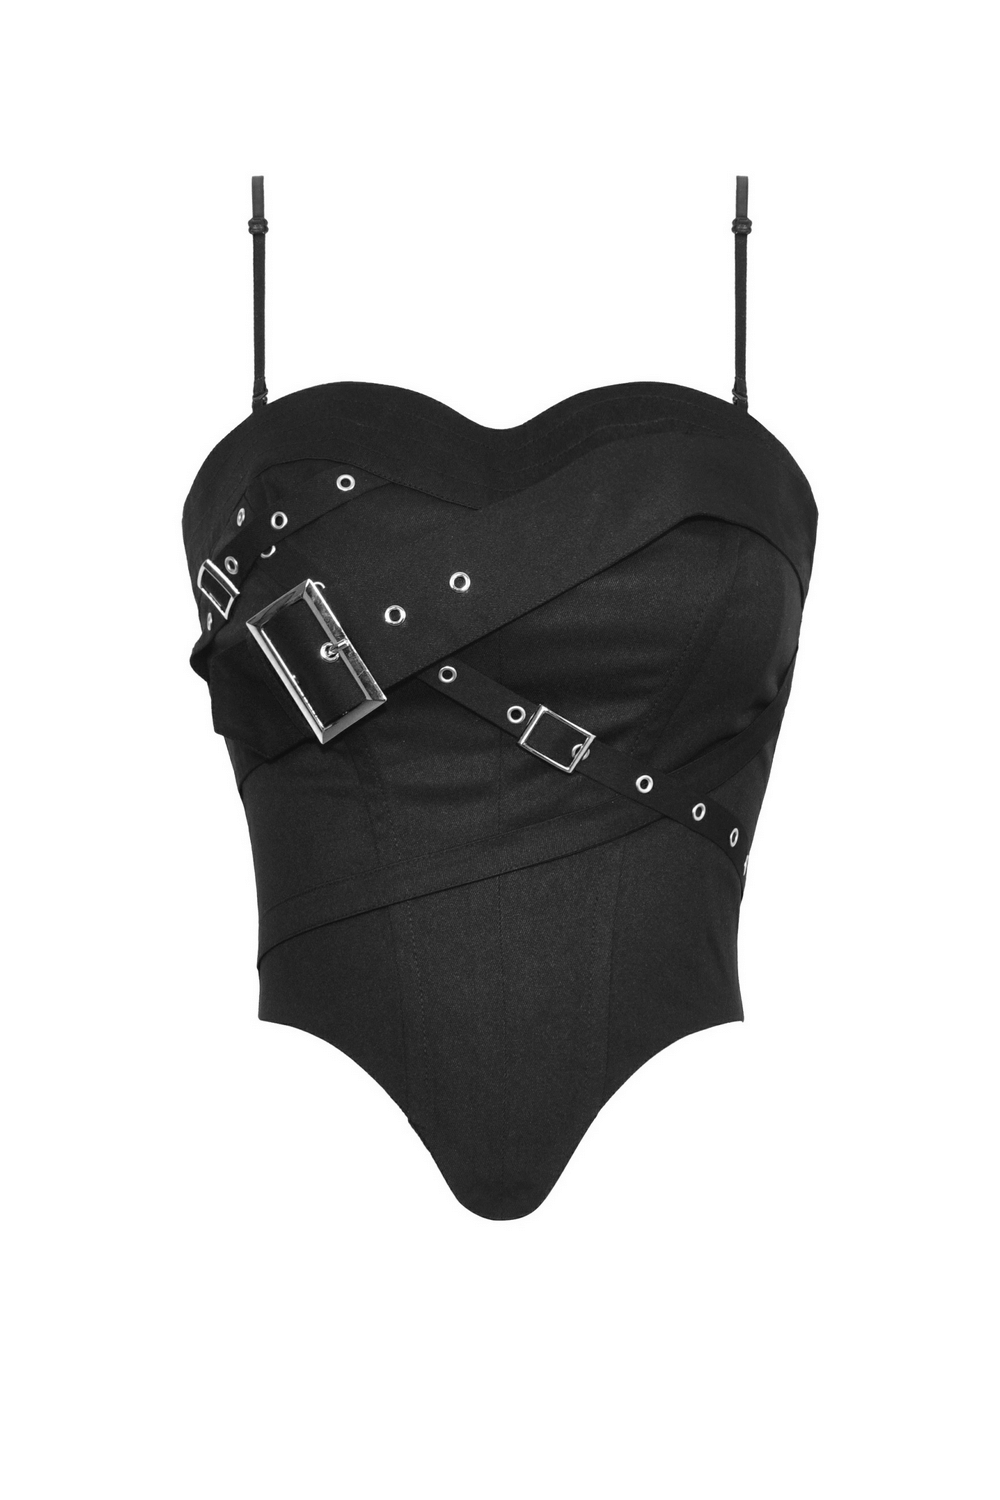 Edgy Punk Corset Top with Adjustable Straps and Buckles